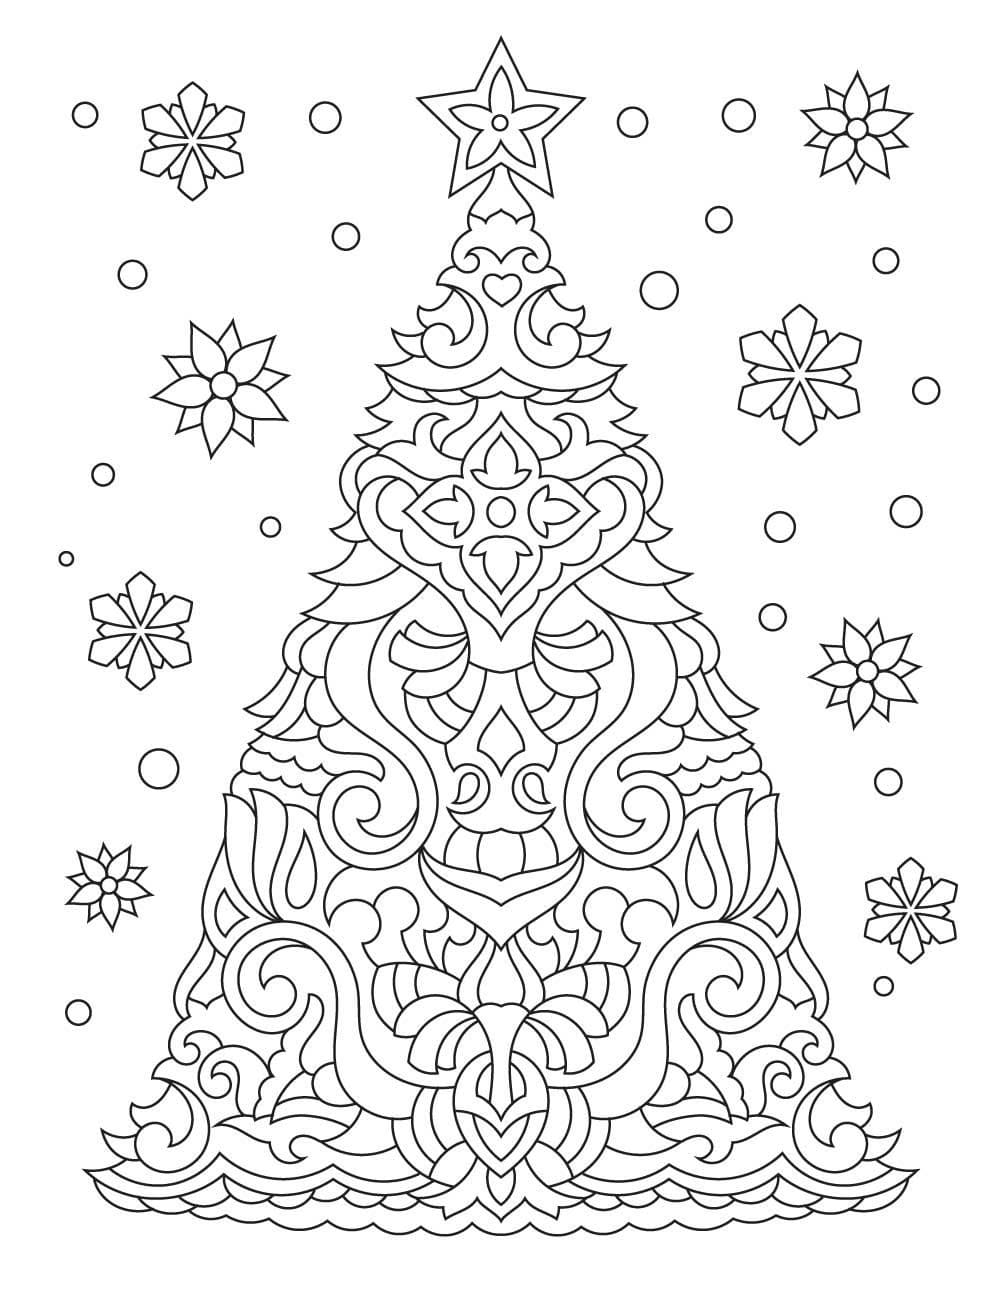 Snowfall Decorated Christmas Tree Coloring Page